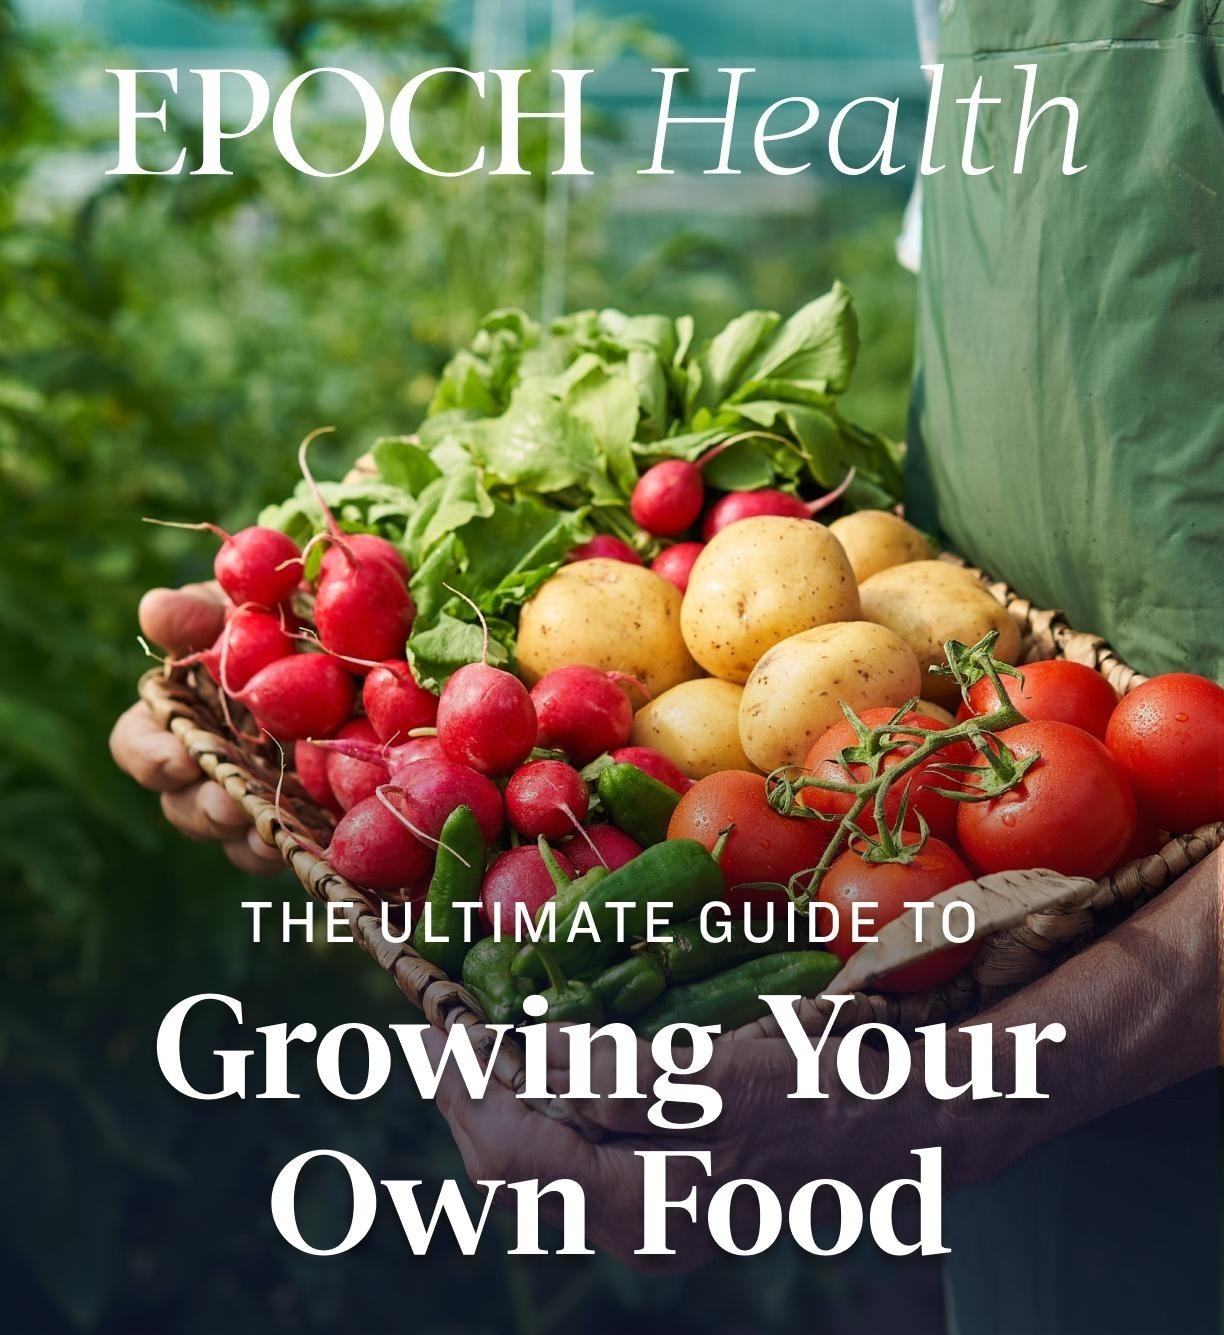 The Ultimate Guide to Growing Your Own Food